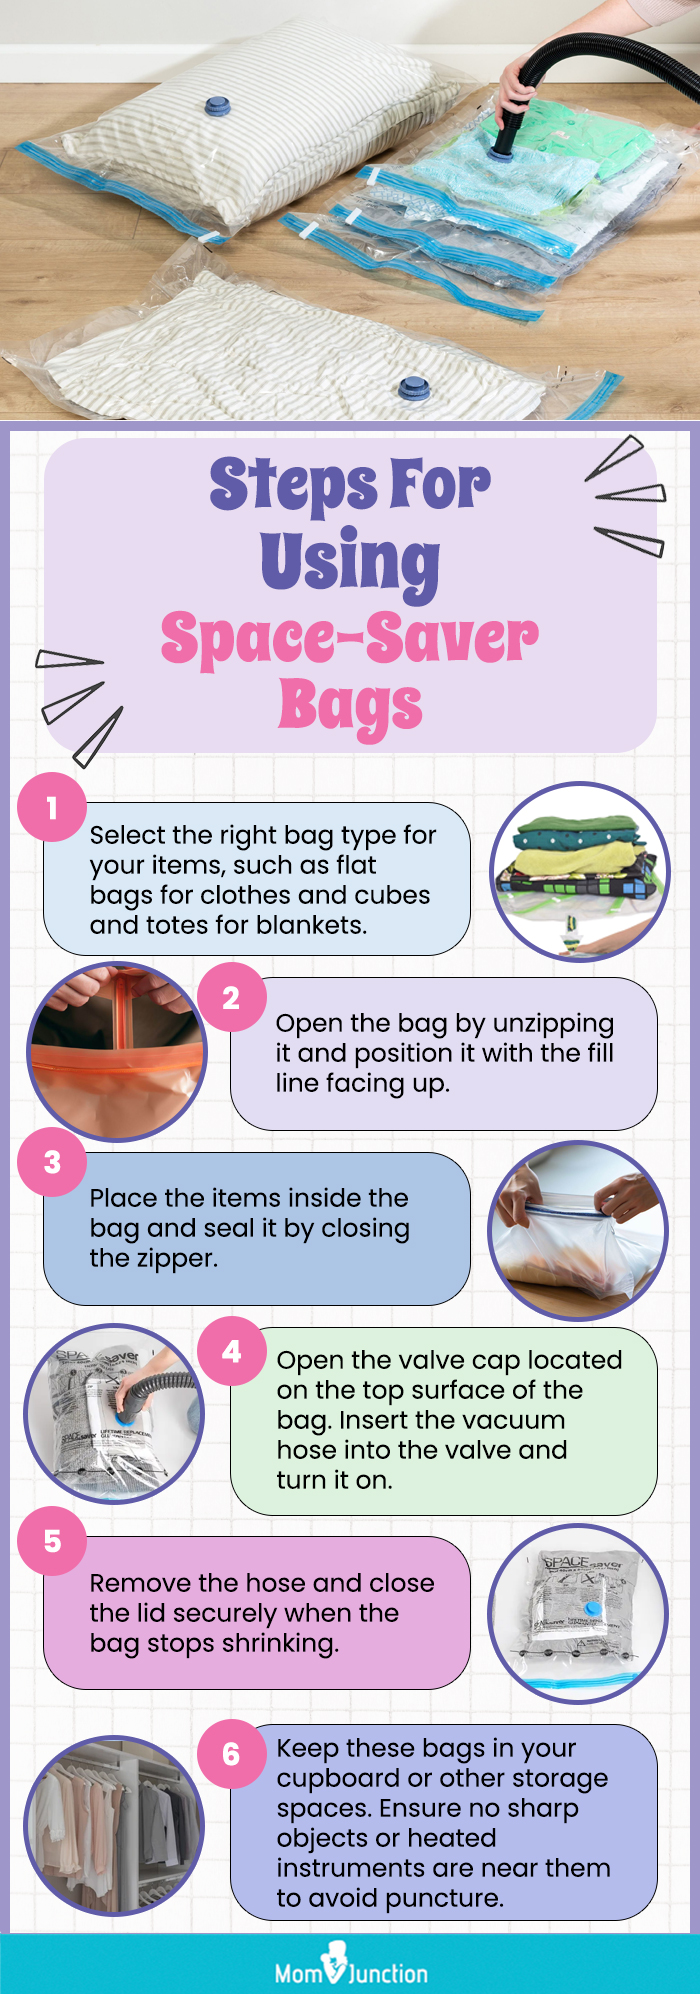 Steps For Using Space Saver Bags(infographic)